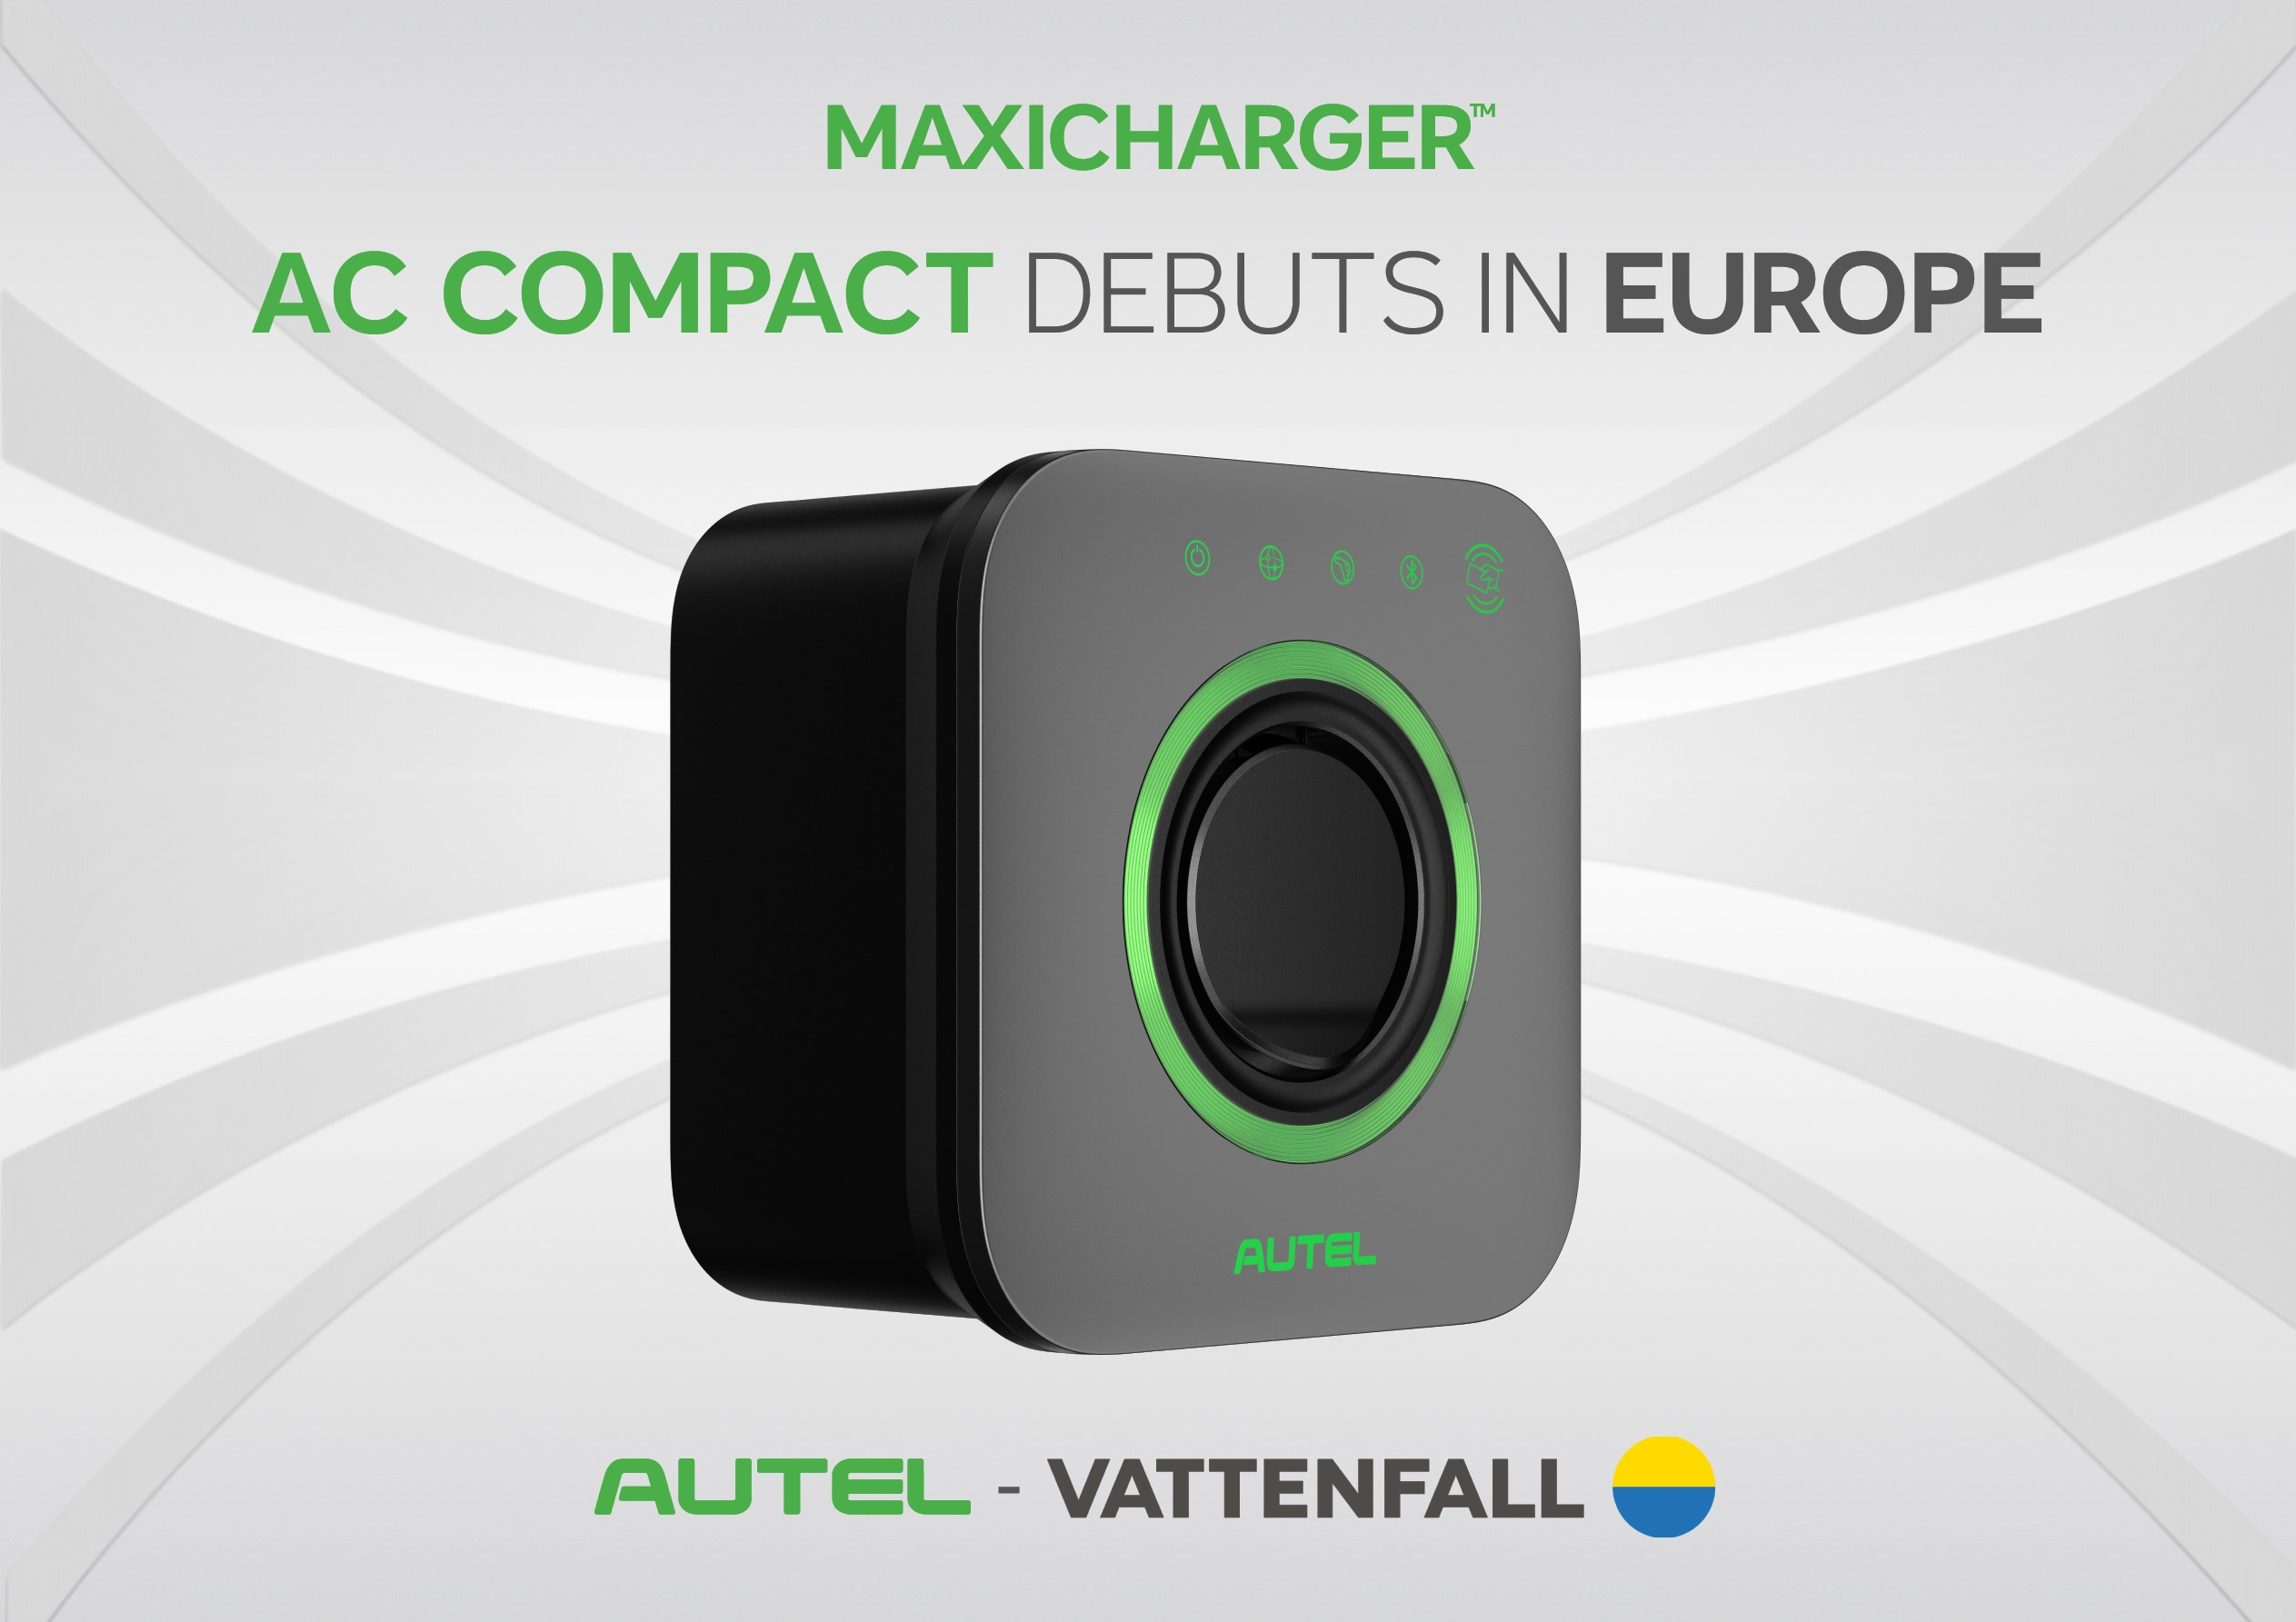 Autel Energy's Maxicharger AC Wallbox and Maxicharger AC Compact will be deployed in Vattenfall's charging stations across Germany